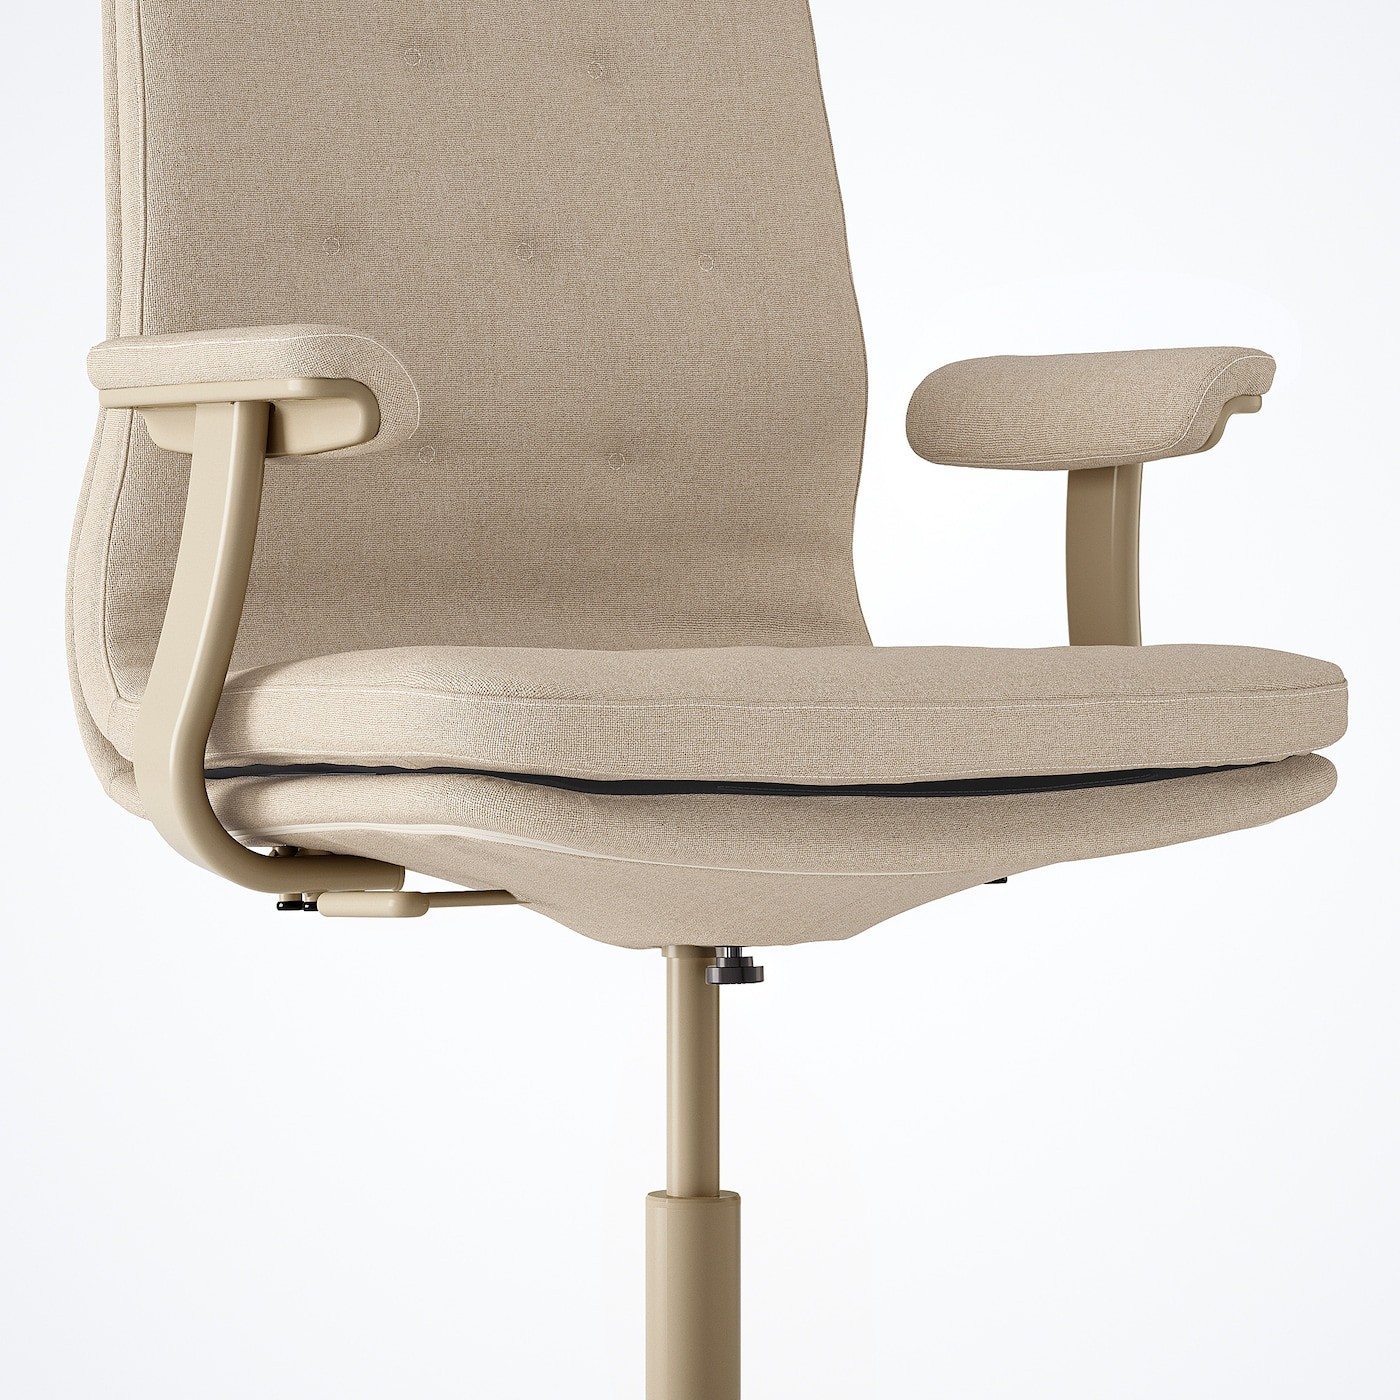 MULLFJÄLLET Conference chair with castors